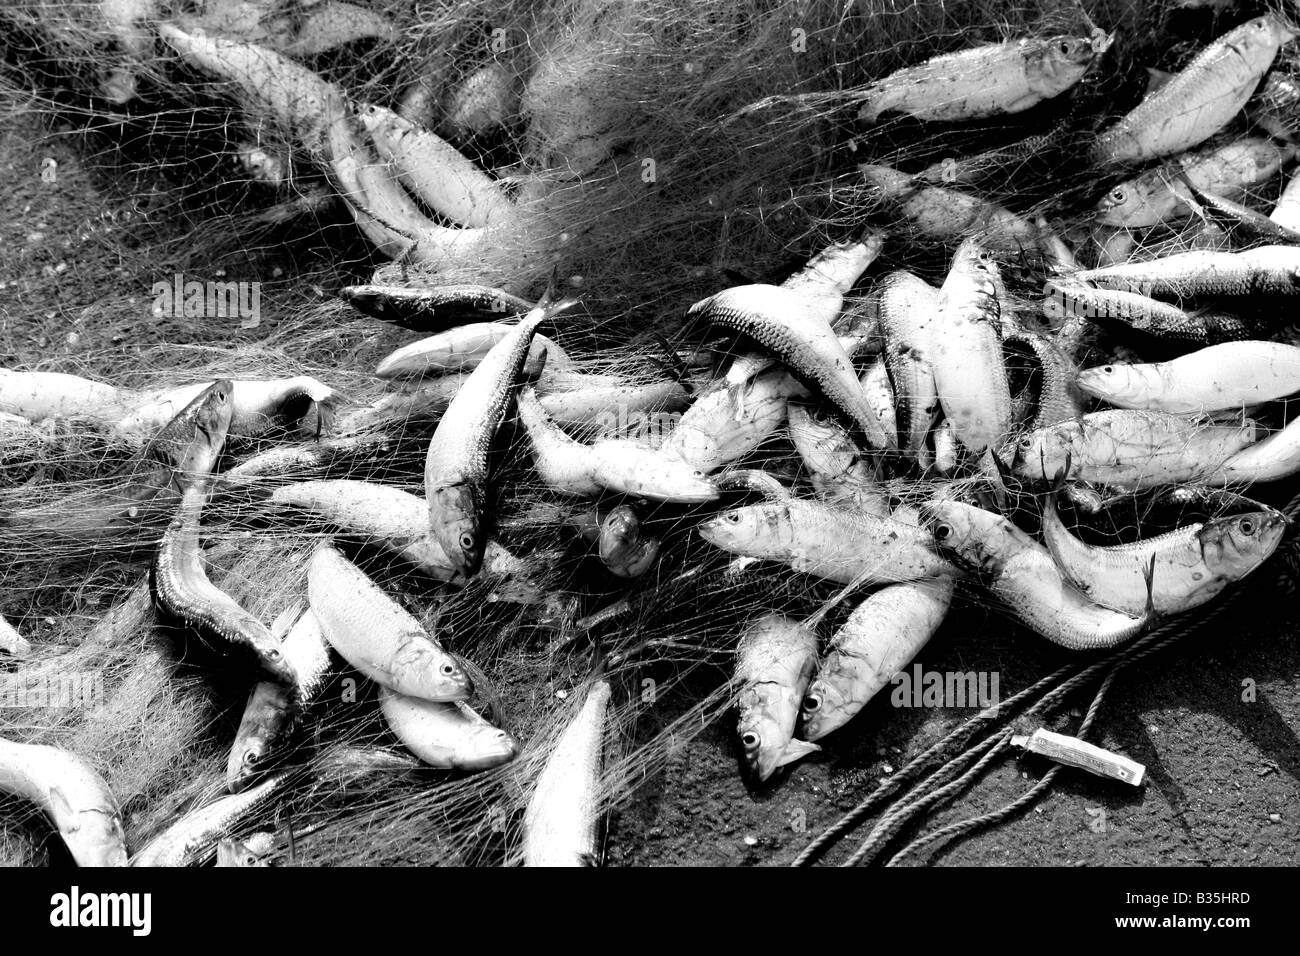 Fish caught in net Black and White Stock Photos & Images - Alamy